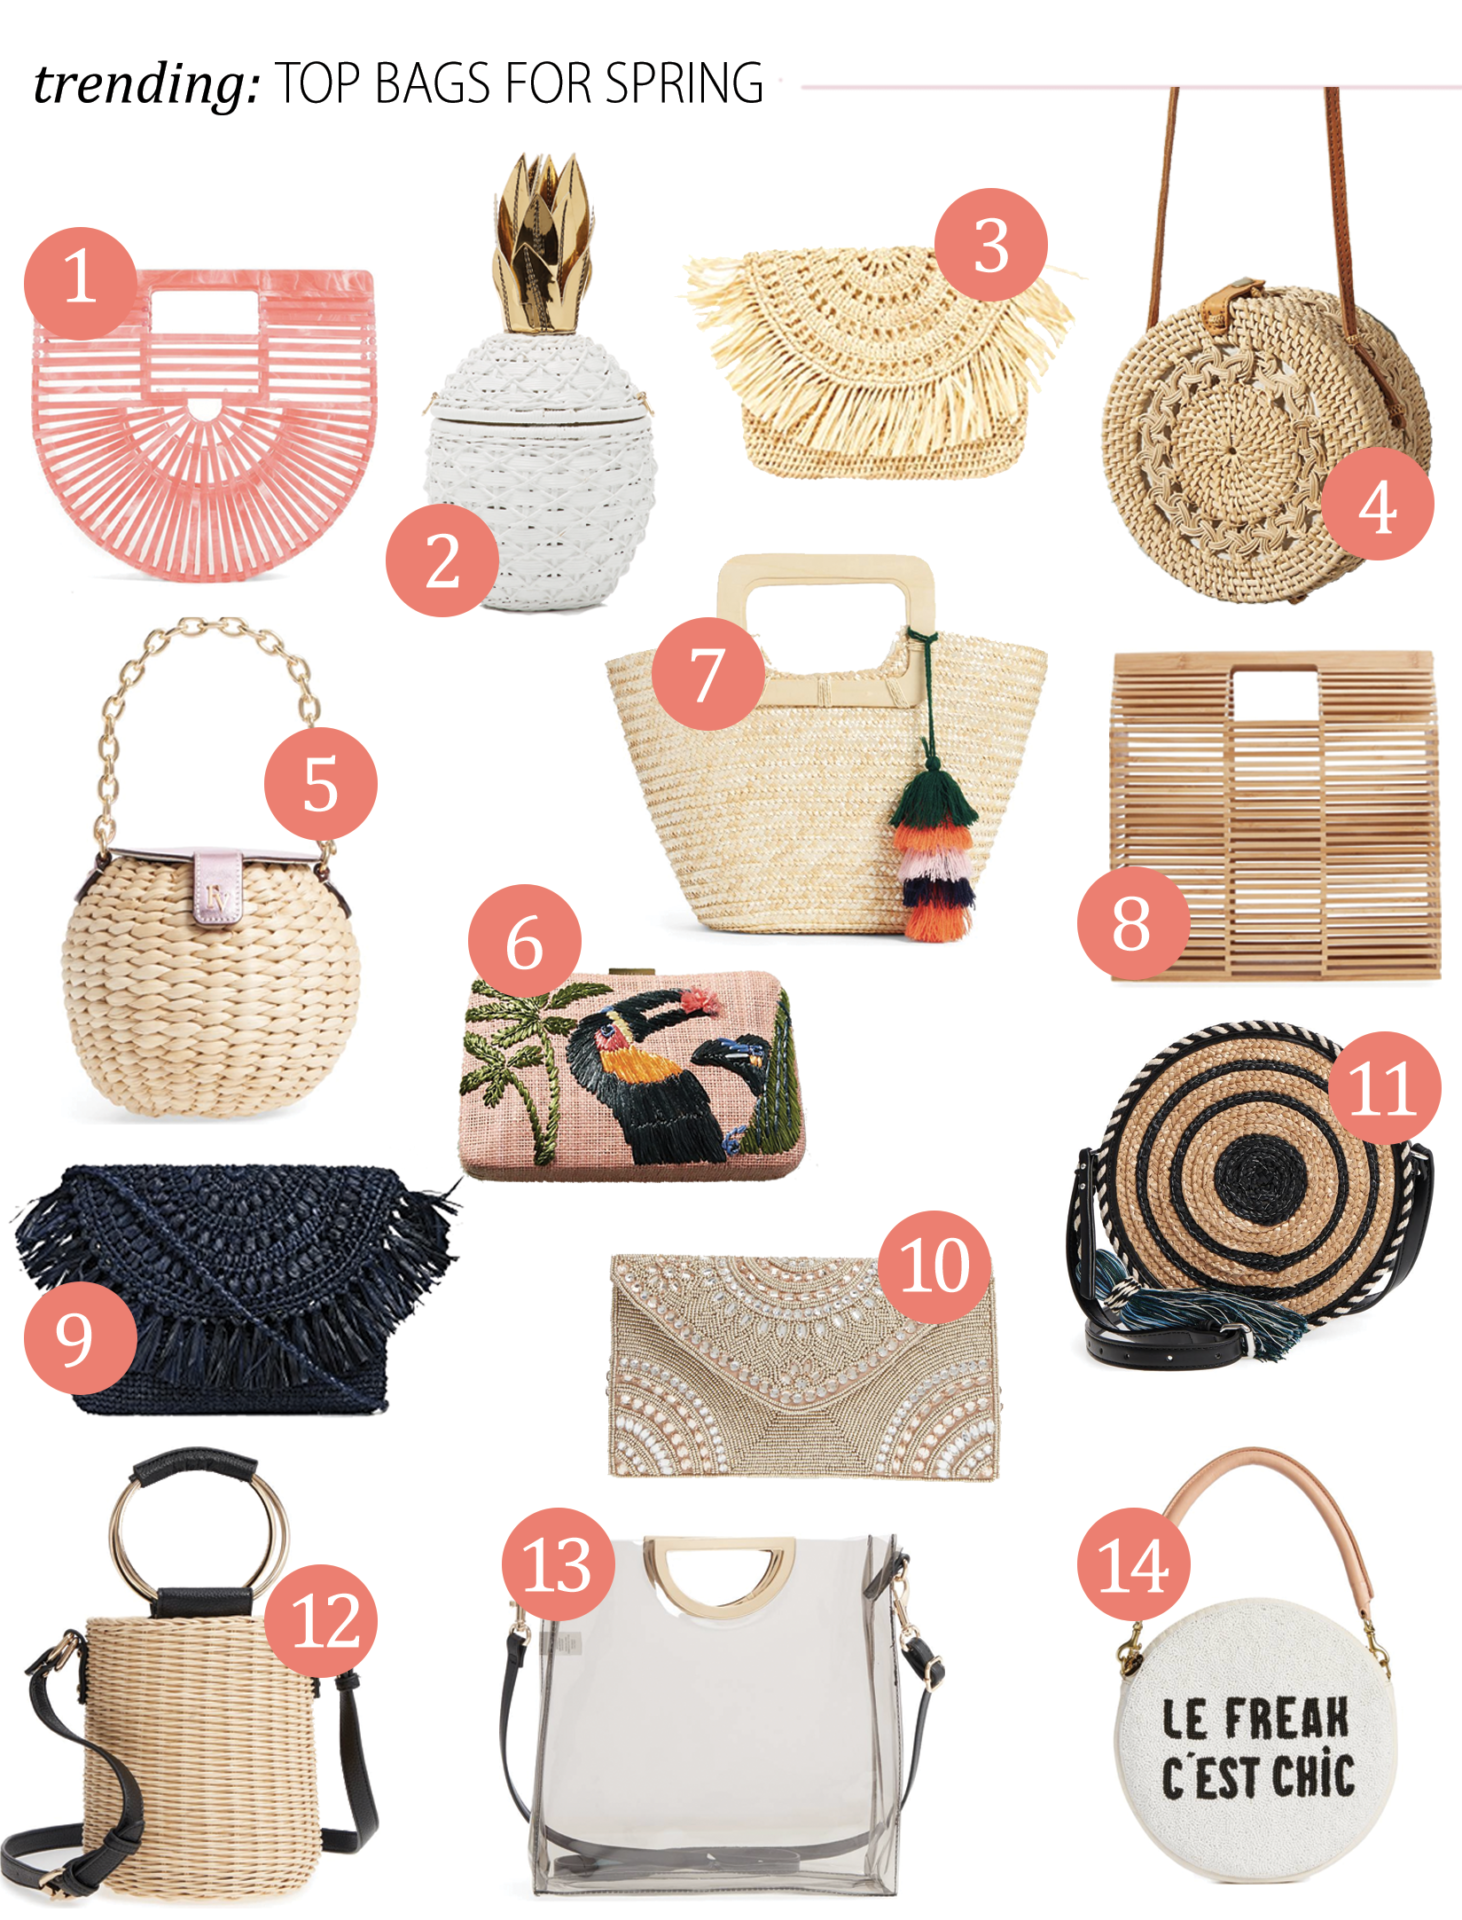 Top Bags For Spring - bucket or straw bags for summer